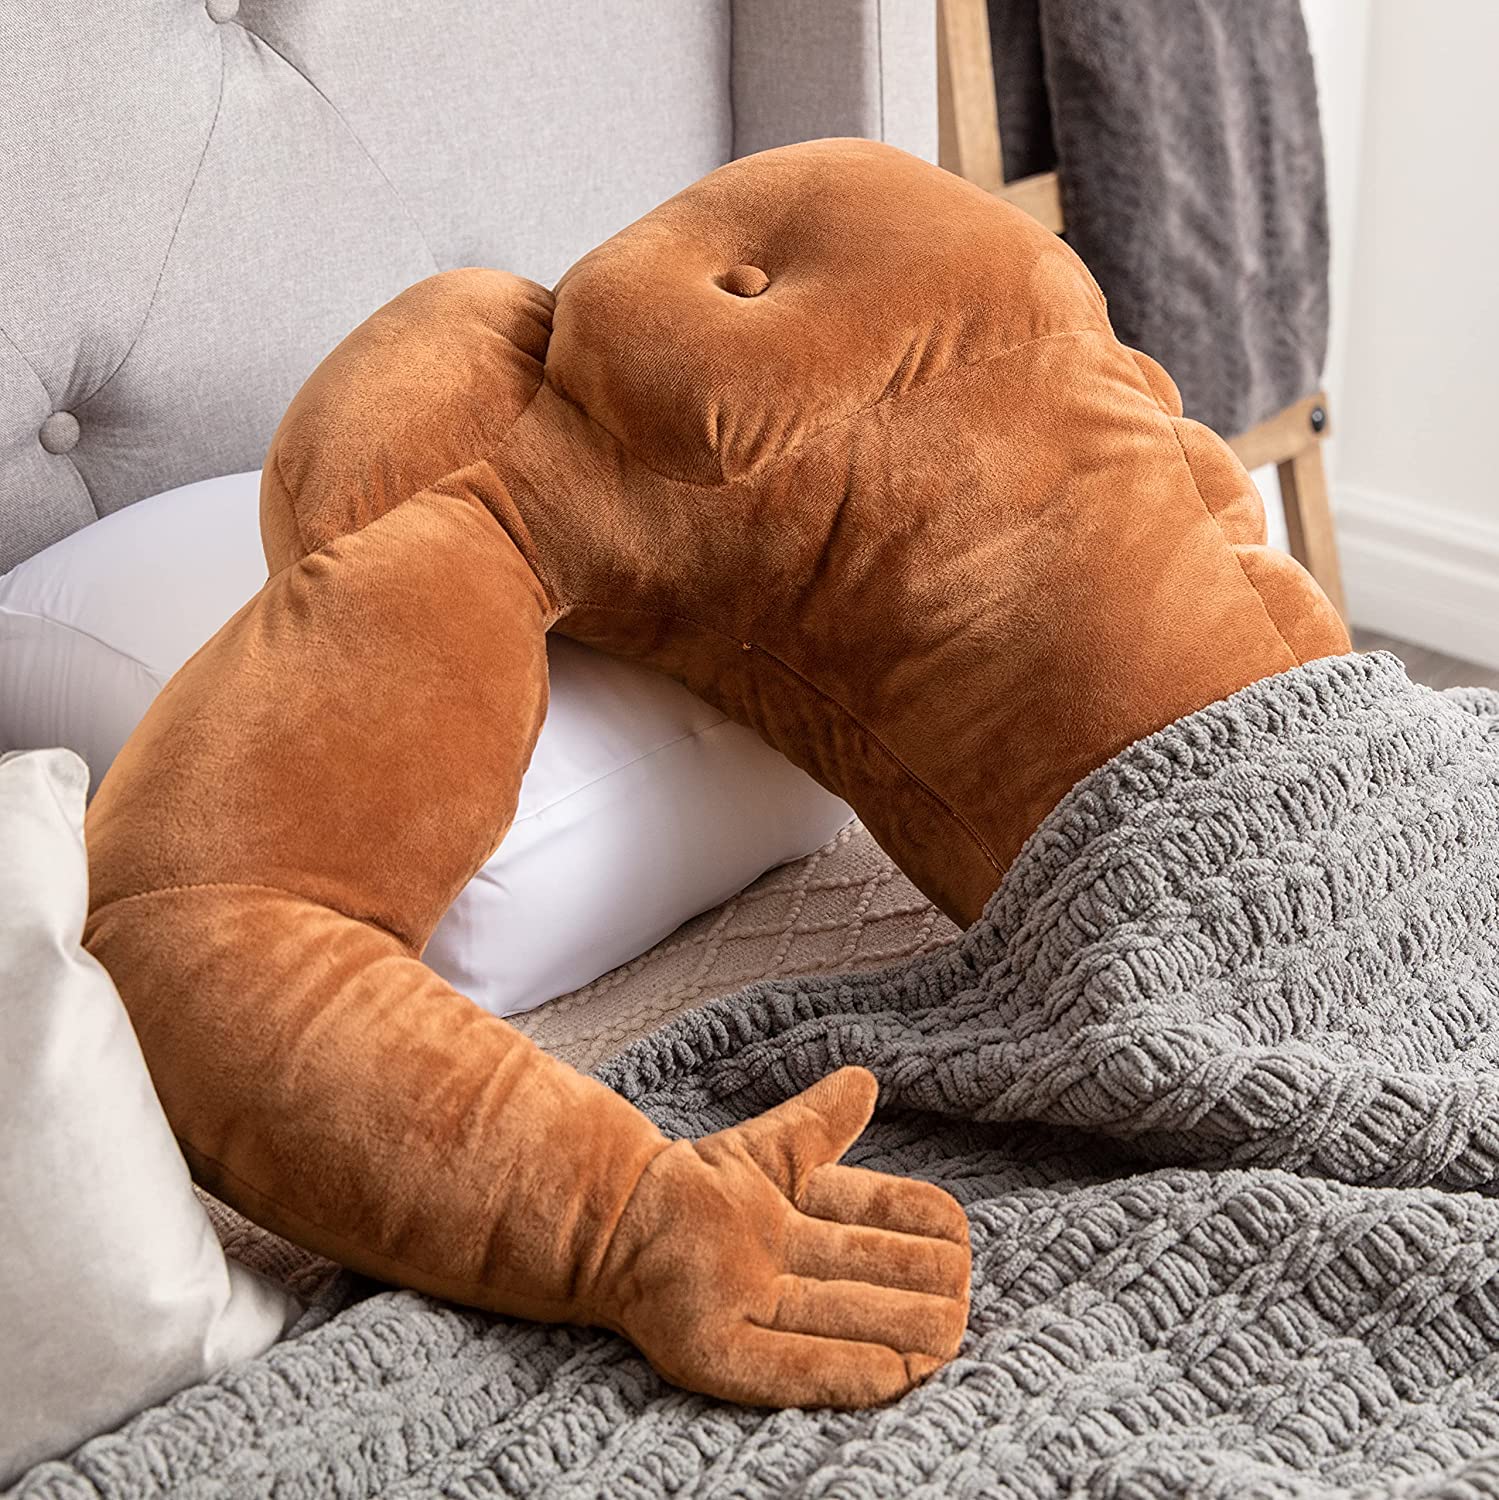 A muscle man pillow is half-tucked under a blanket on a bed.